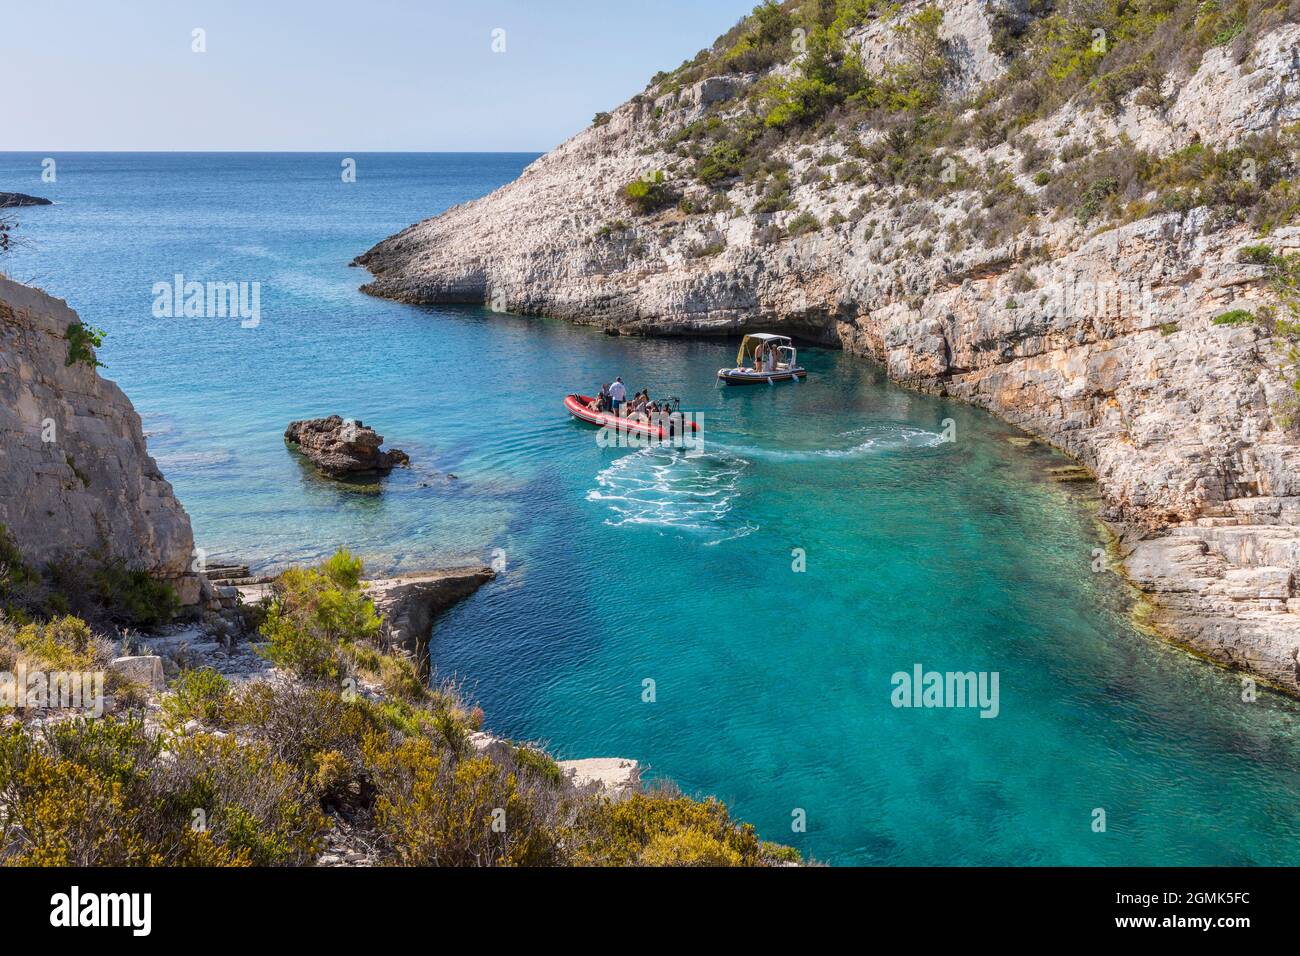 Bay with tourist boats in island Vis Stock Photo